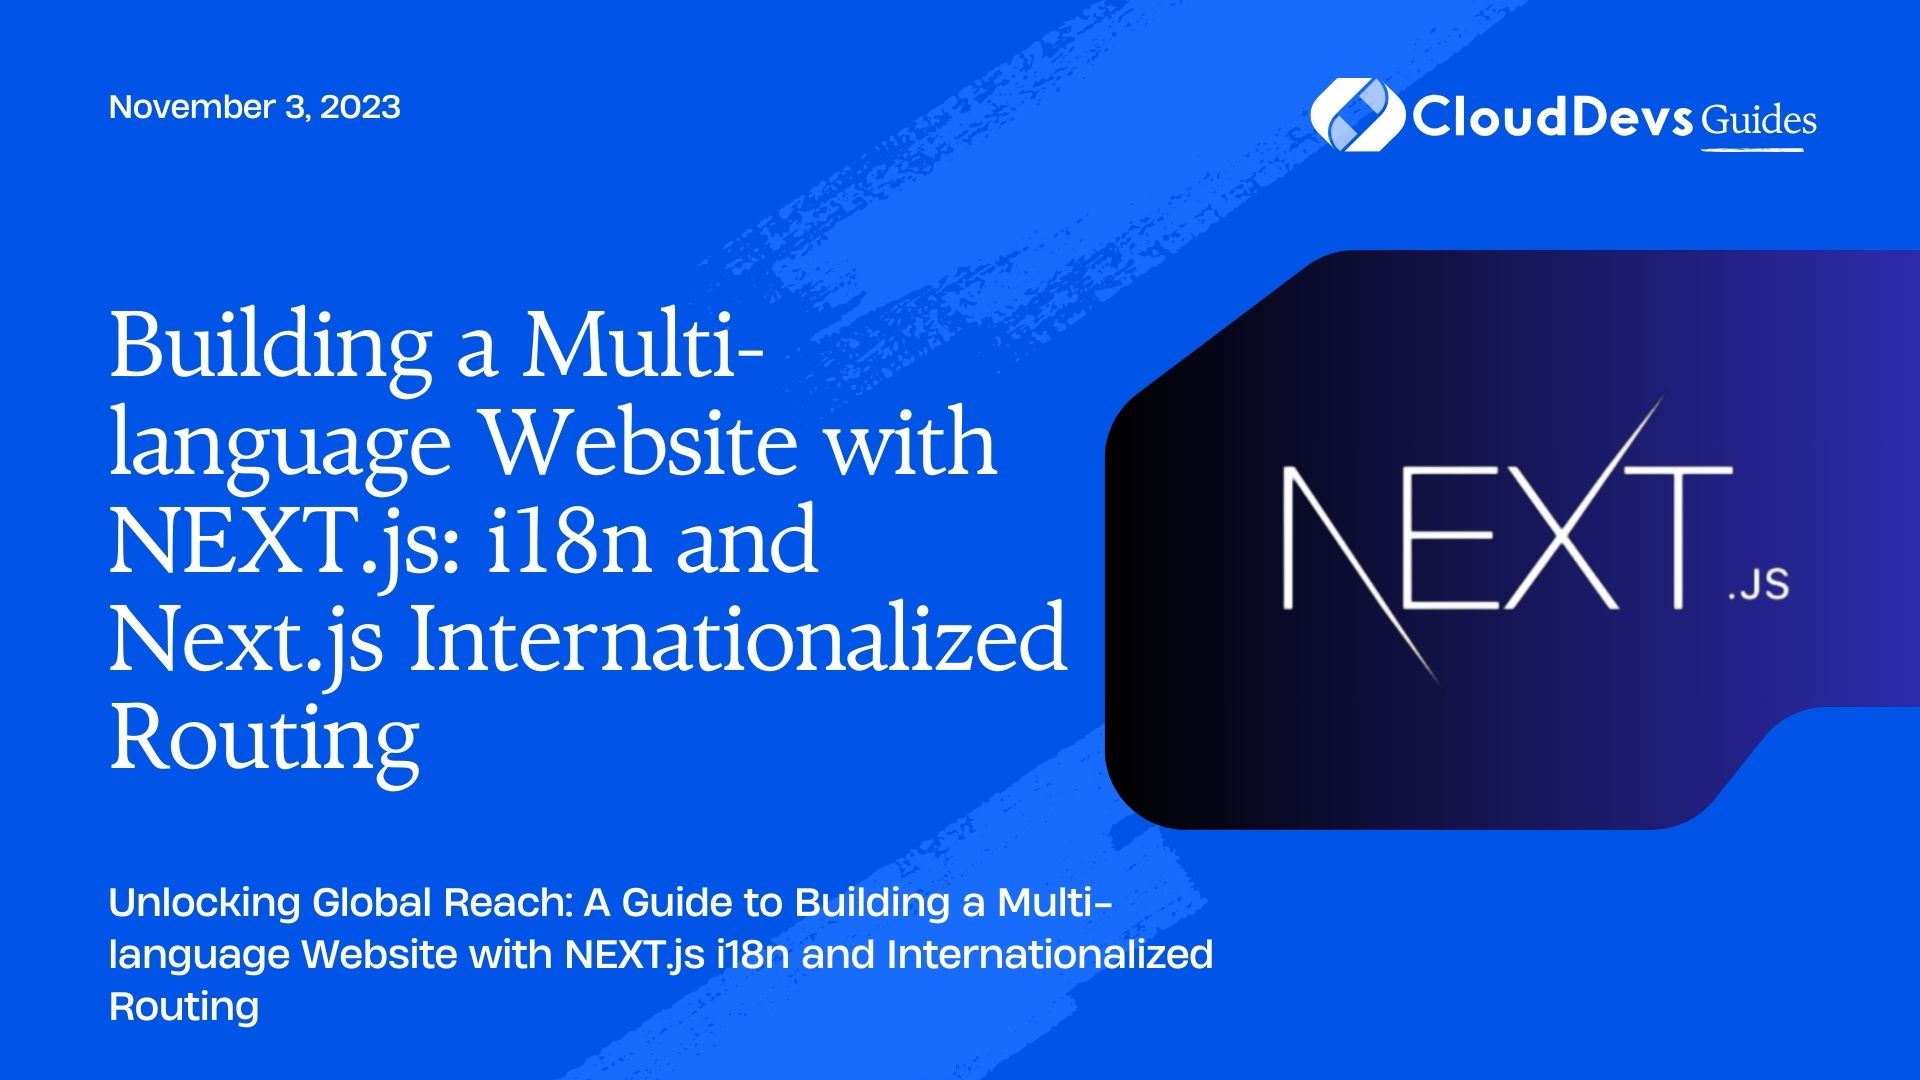 Building a Multi-language Website with NEXT.js: i18n and Next.js Internationalized Routing